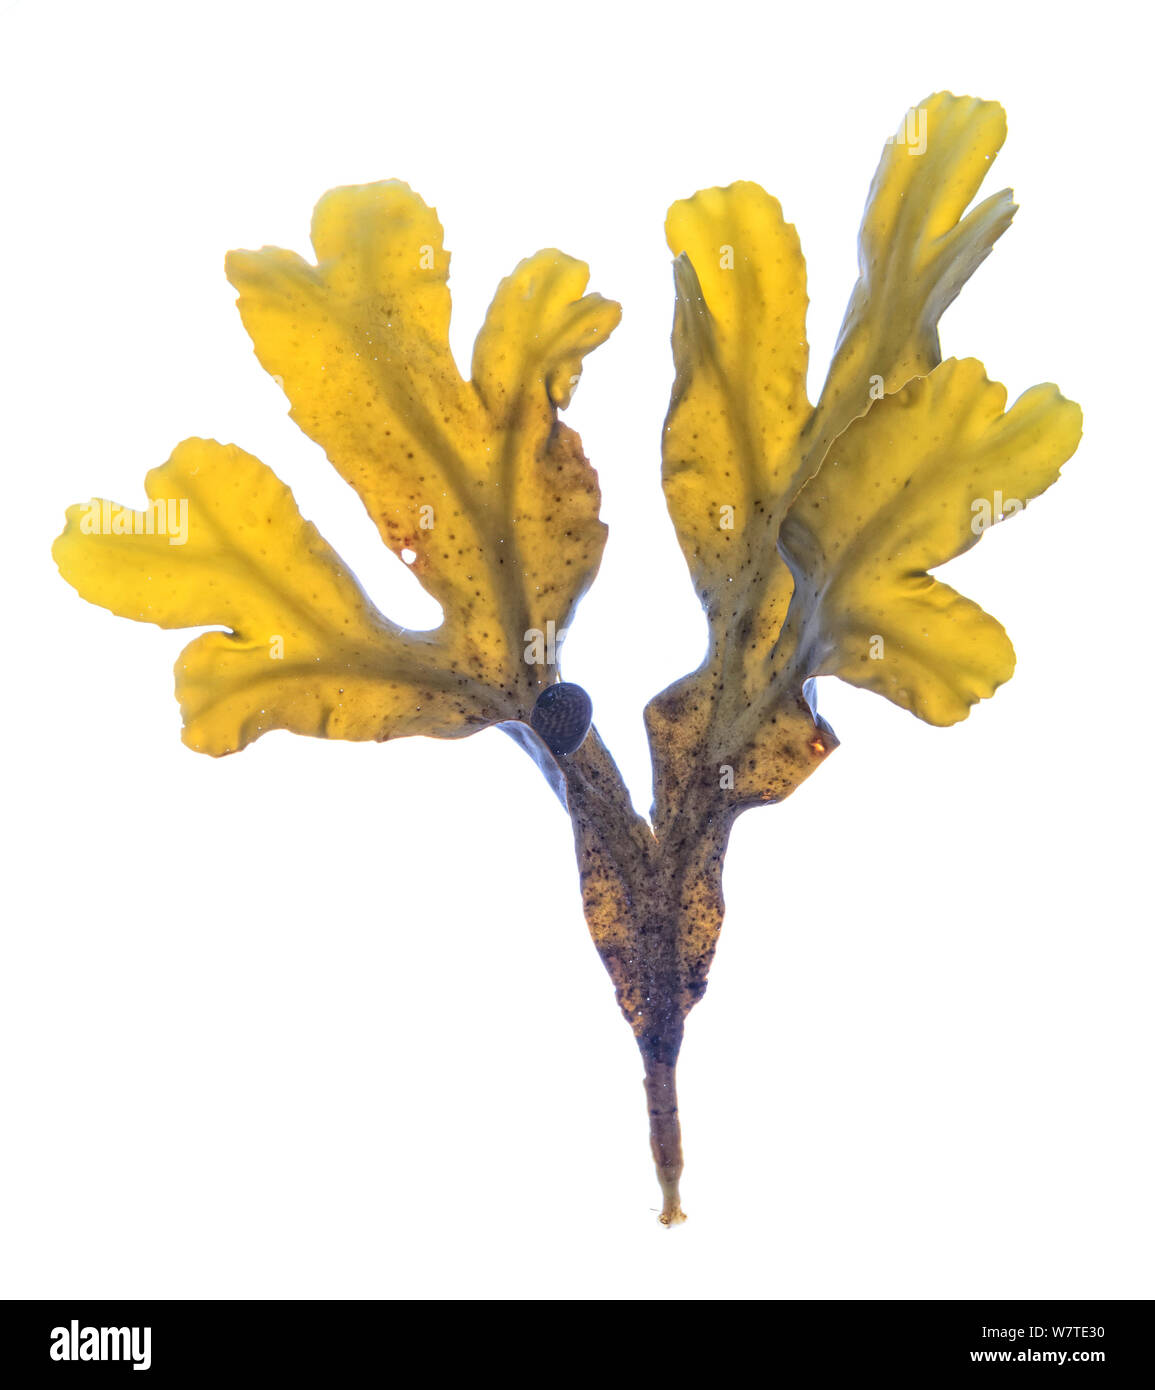 Bladder Wrack (Fucus vesiculosus) from rock pool, County Clare, Ireland. December. Meetyourneighbours.net project Stock Photo